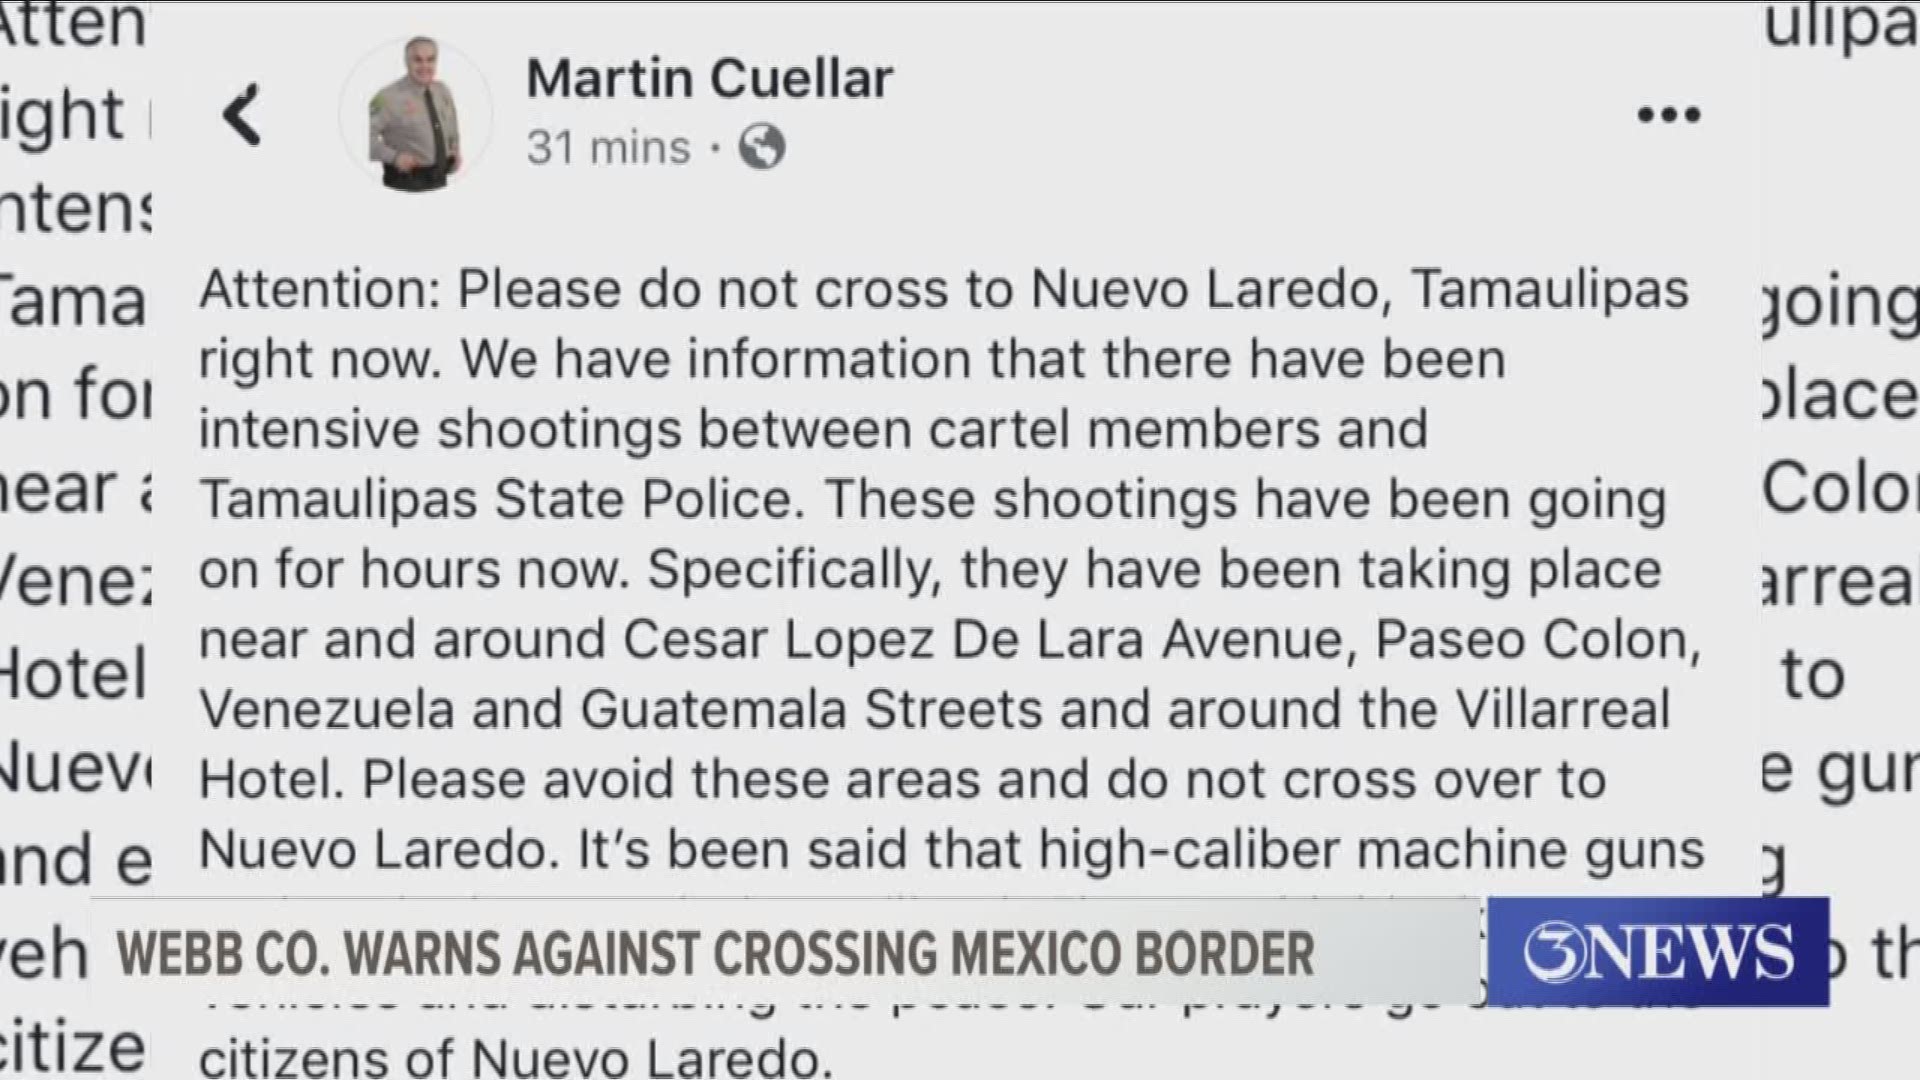 The shootings are reportedly taking place in Nuevo Laredo, Tamaulipas Mexico, according to social media post.